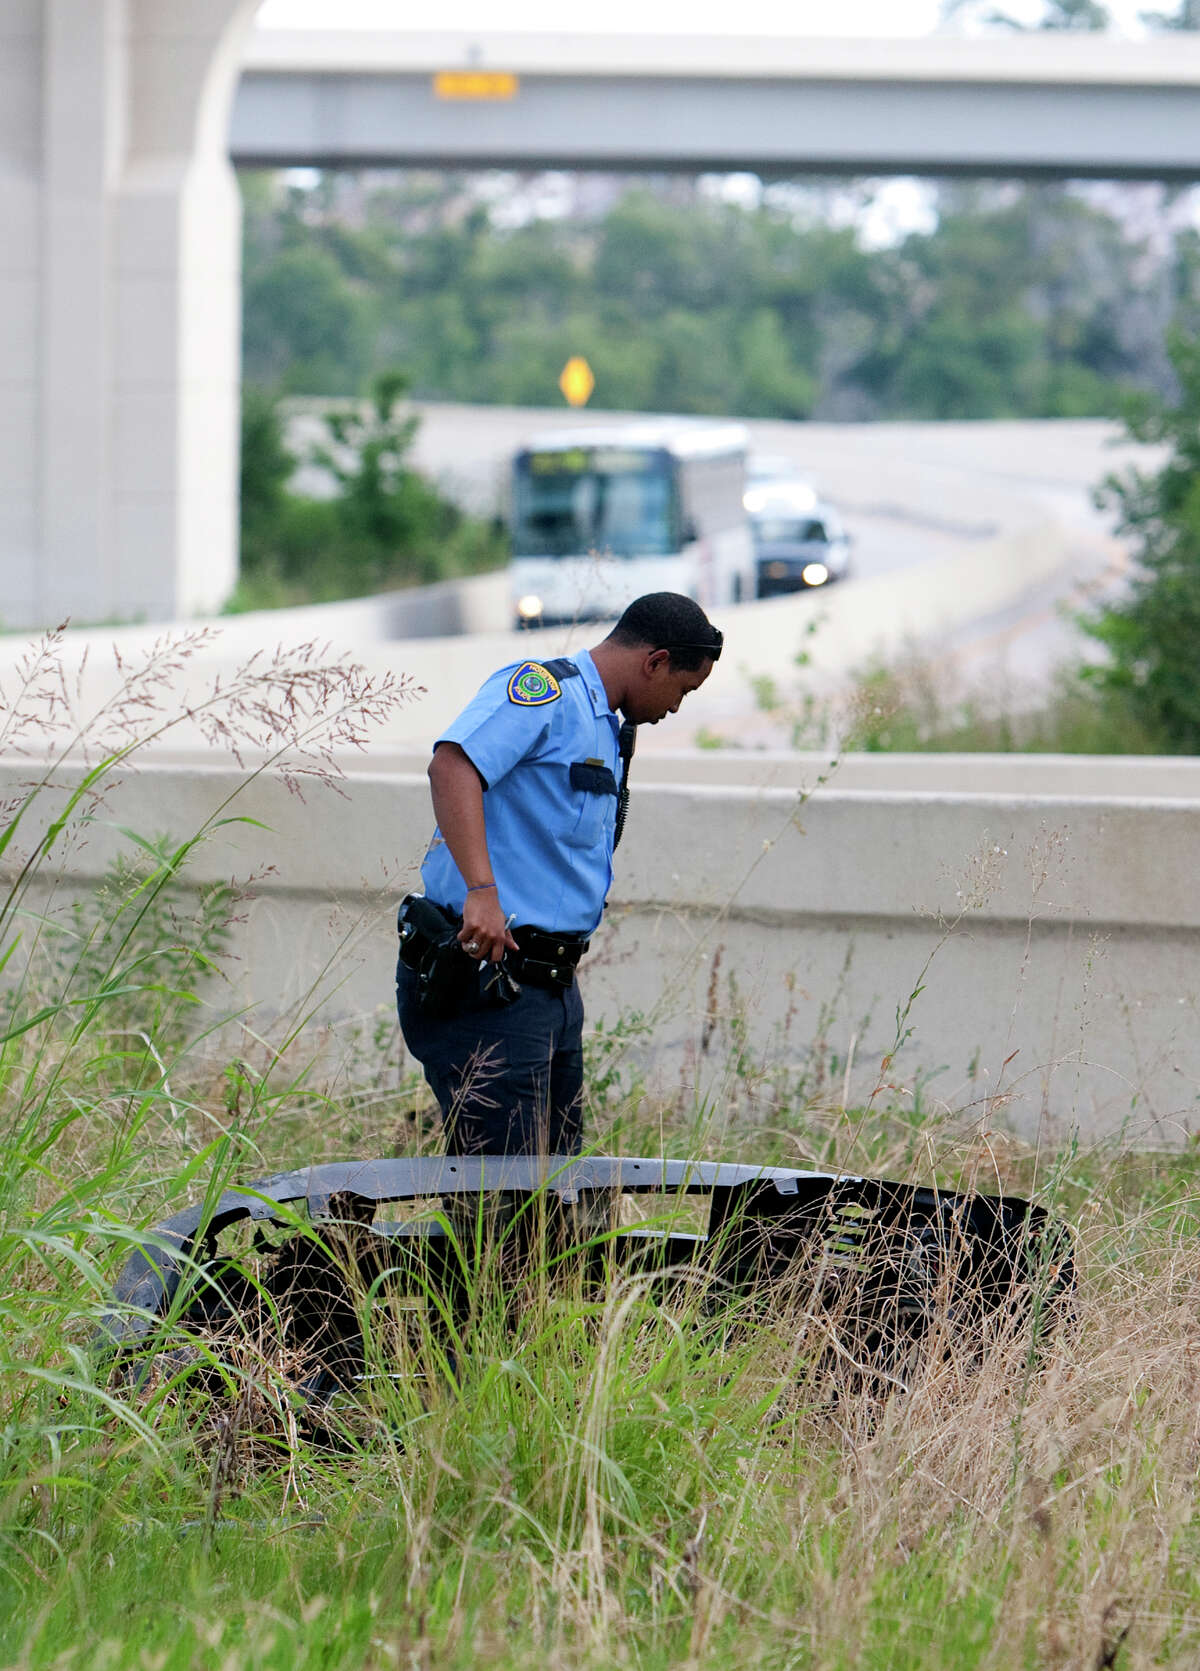 Police investigate an accident after a woman jumped the barrier of a slip ramp from Katy Freeway onto the 290 HOV lane Wednesday, May 30, 2012, in Houston. The driver was traveling at a high rate of speed when she jumped the barrier and hit the TxDot Field Office under the overpass. She was taken to Memorial Hermann Memorial and was conscious and breathing.